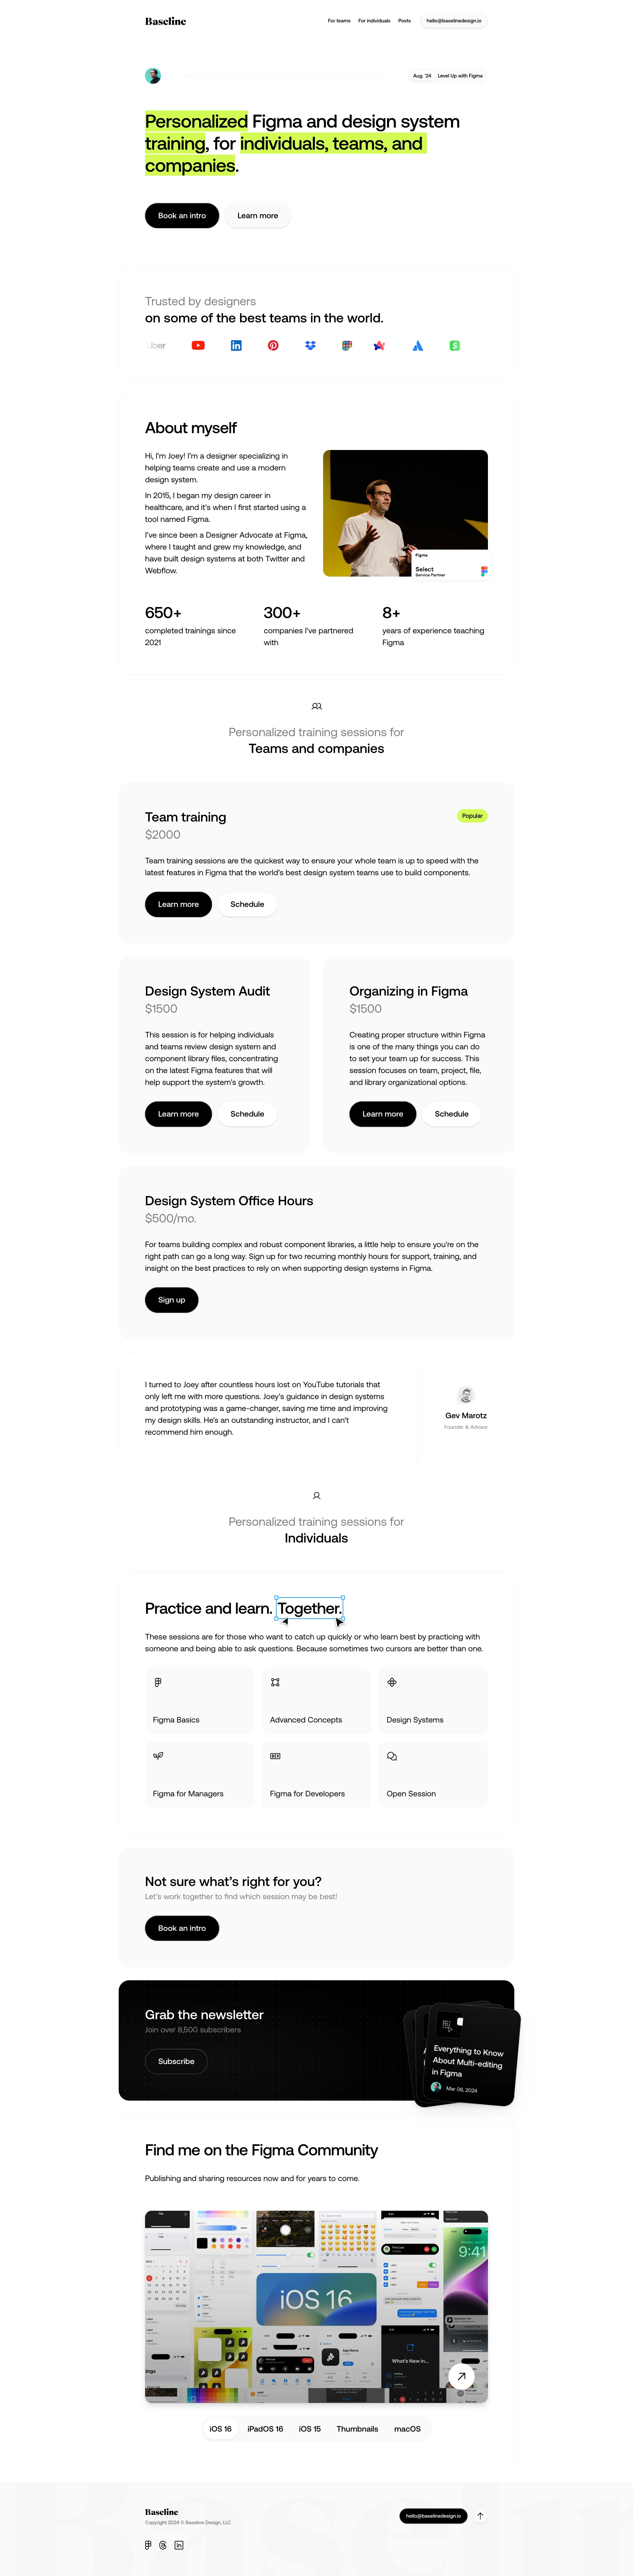 Baseline Design Landing Page Example: Personalized Figma and design system training, for individuals, teams, and companies.